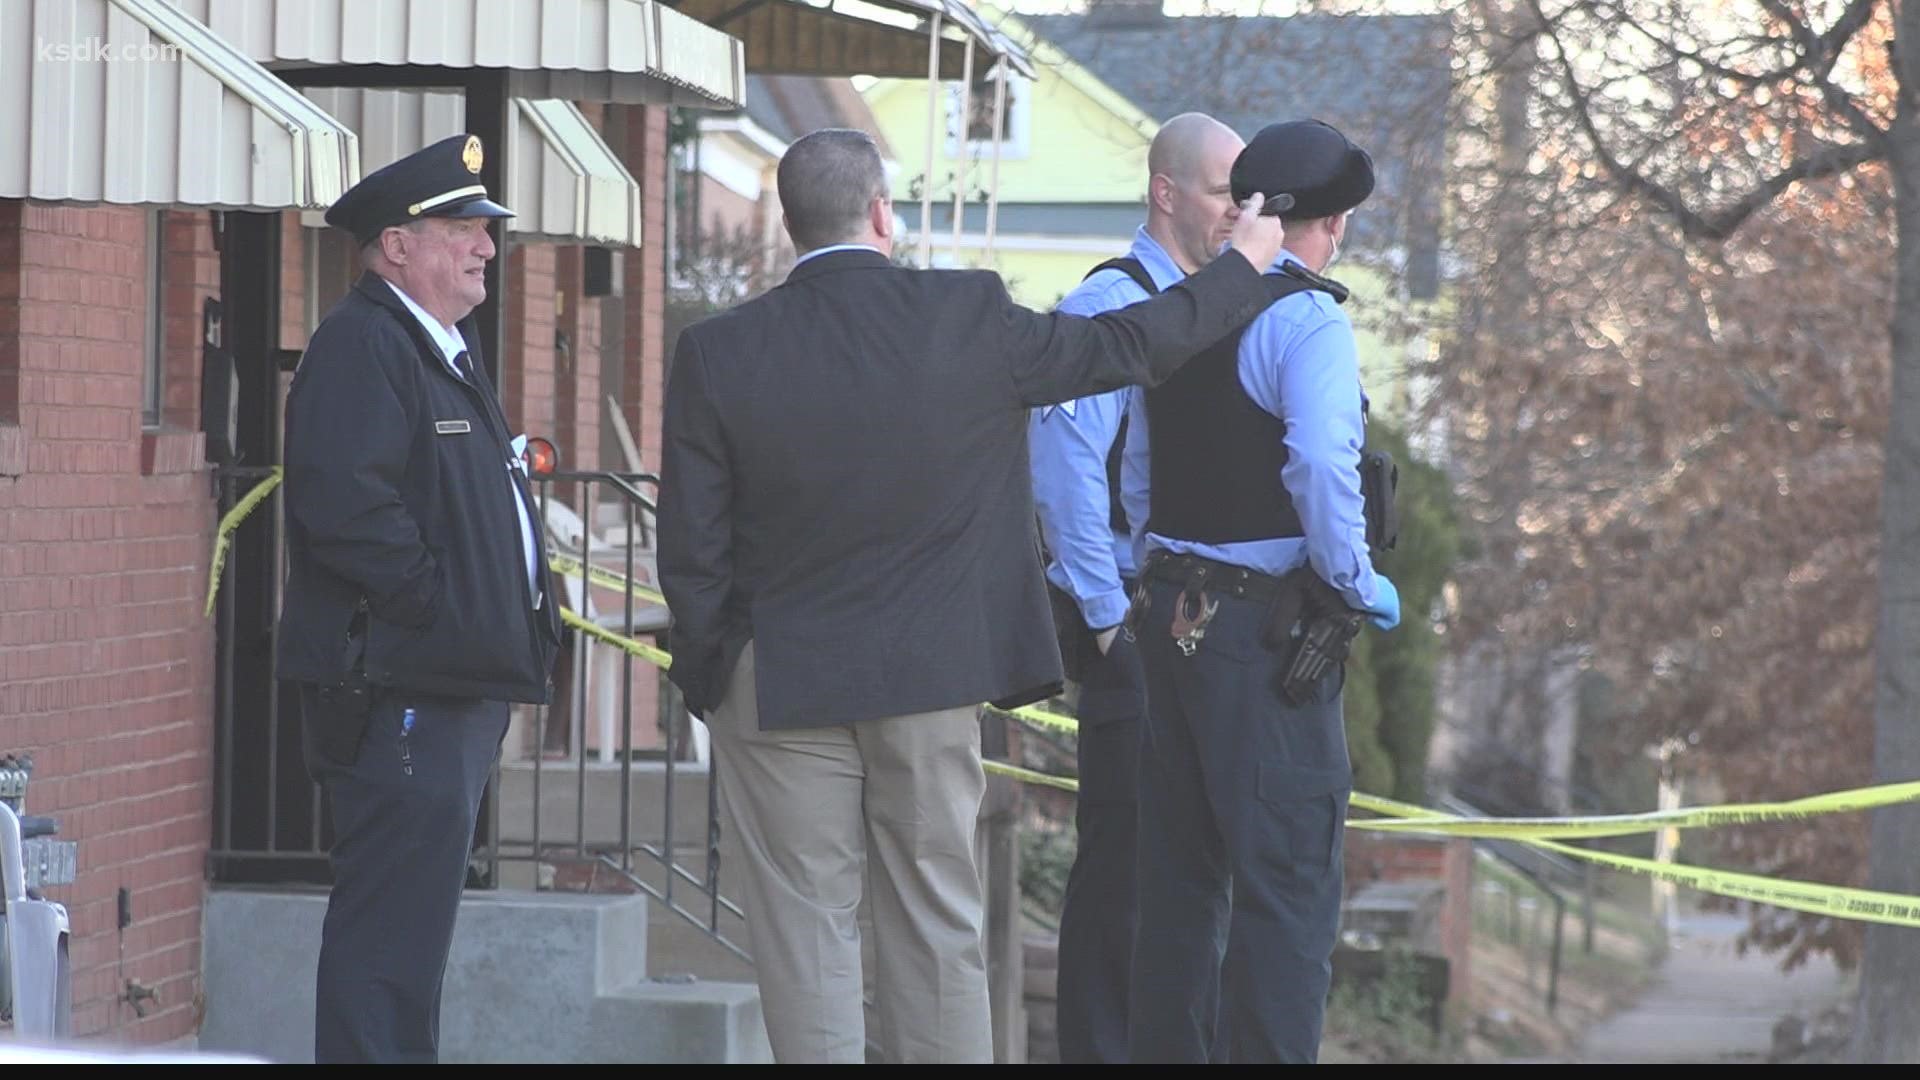 He was found in the basement of an apartment building near the Clifton Heights neighborhood.